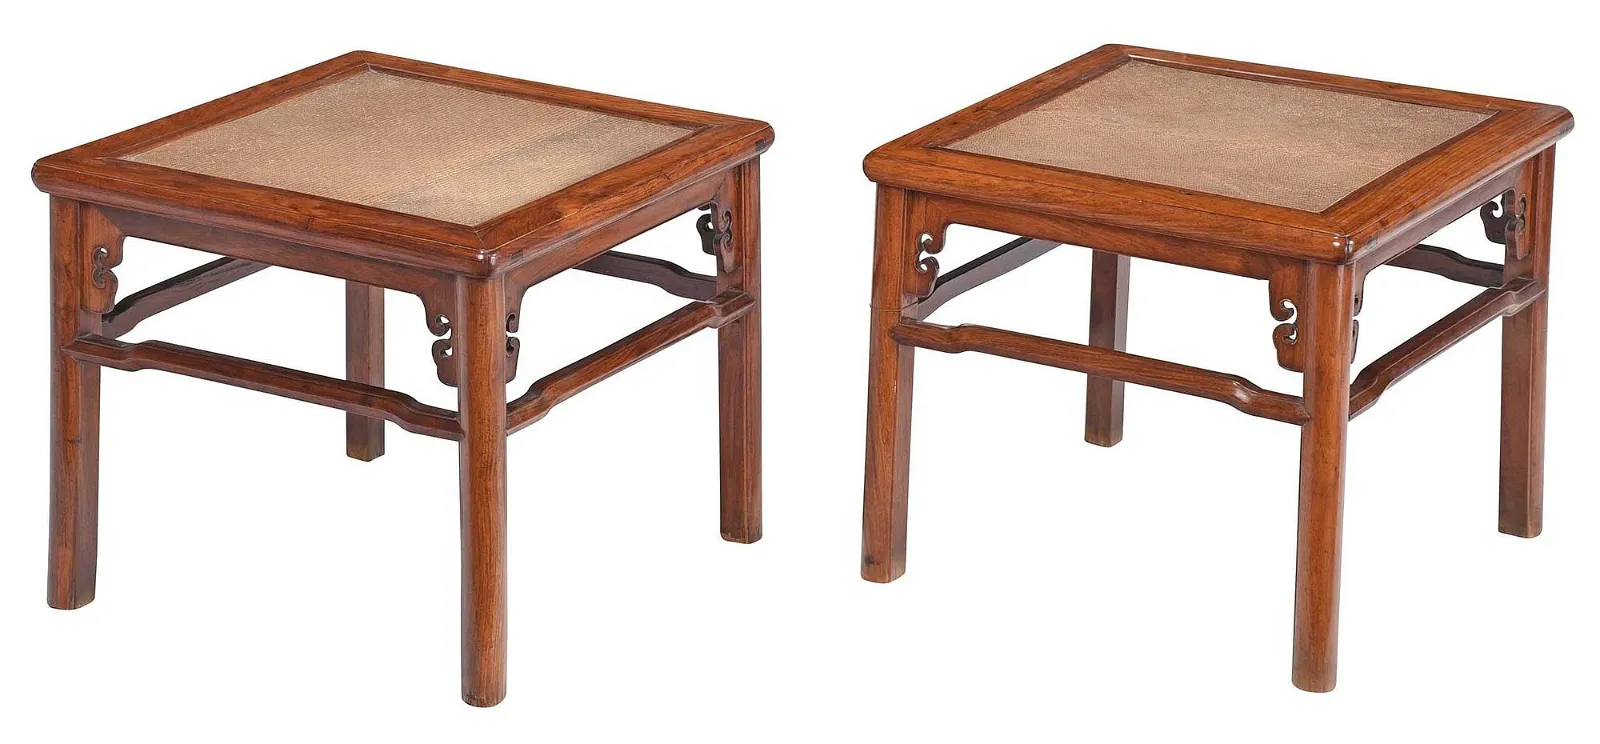 Classical Chinese furnishings steamrolled modest estimates to sell for six figures at Brunk